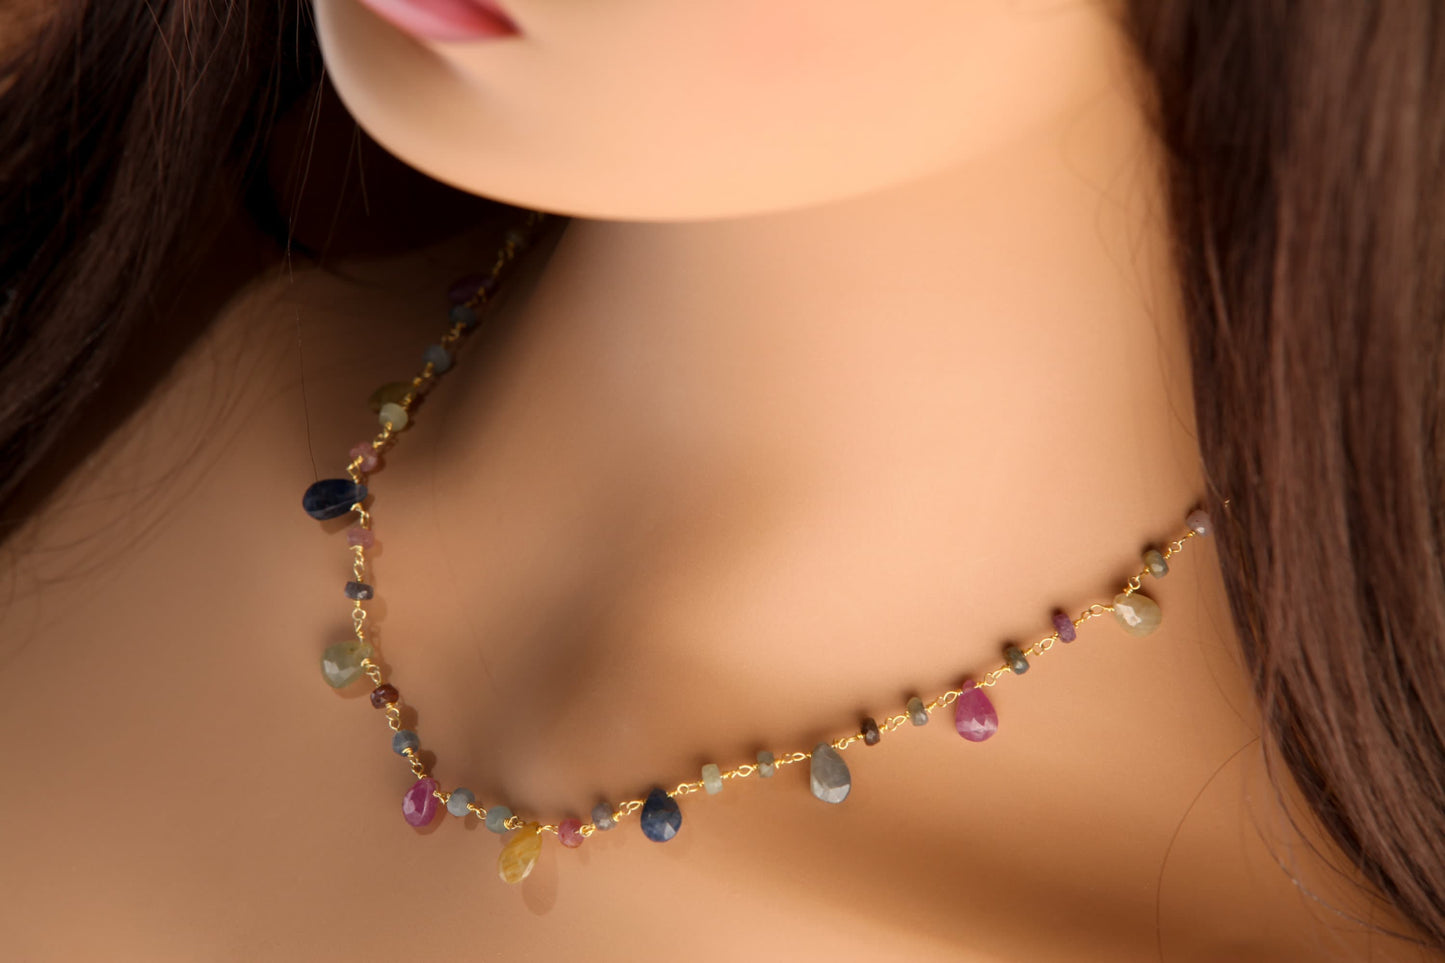 Multi Sapphire Necklace Wire Wrapped Dangling Faceted Pear Drop 5x7-6x9mm with Sapphire Rondelle in 14K Gold Filled Chain & Clasp Necklace